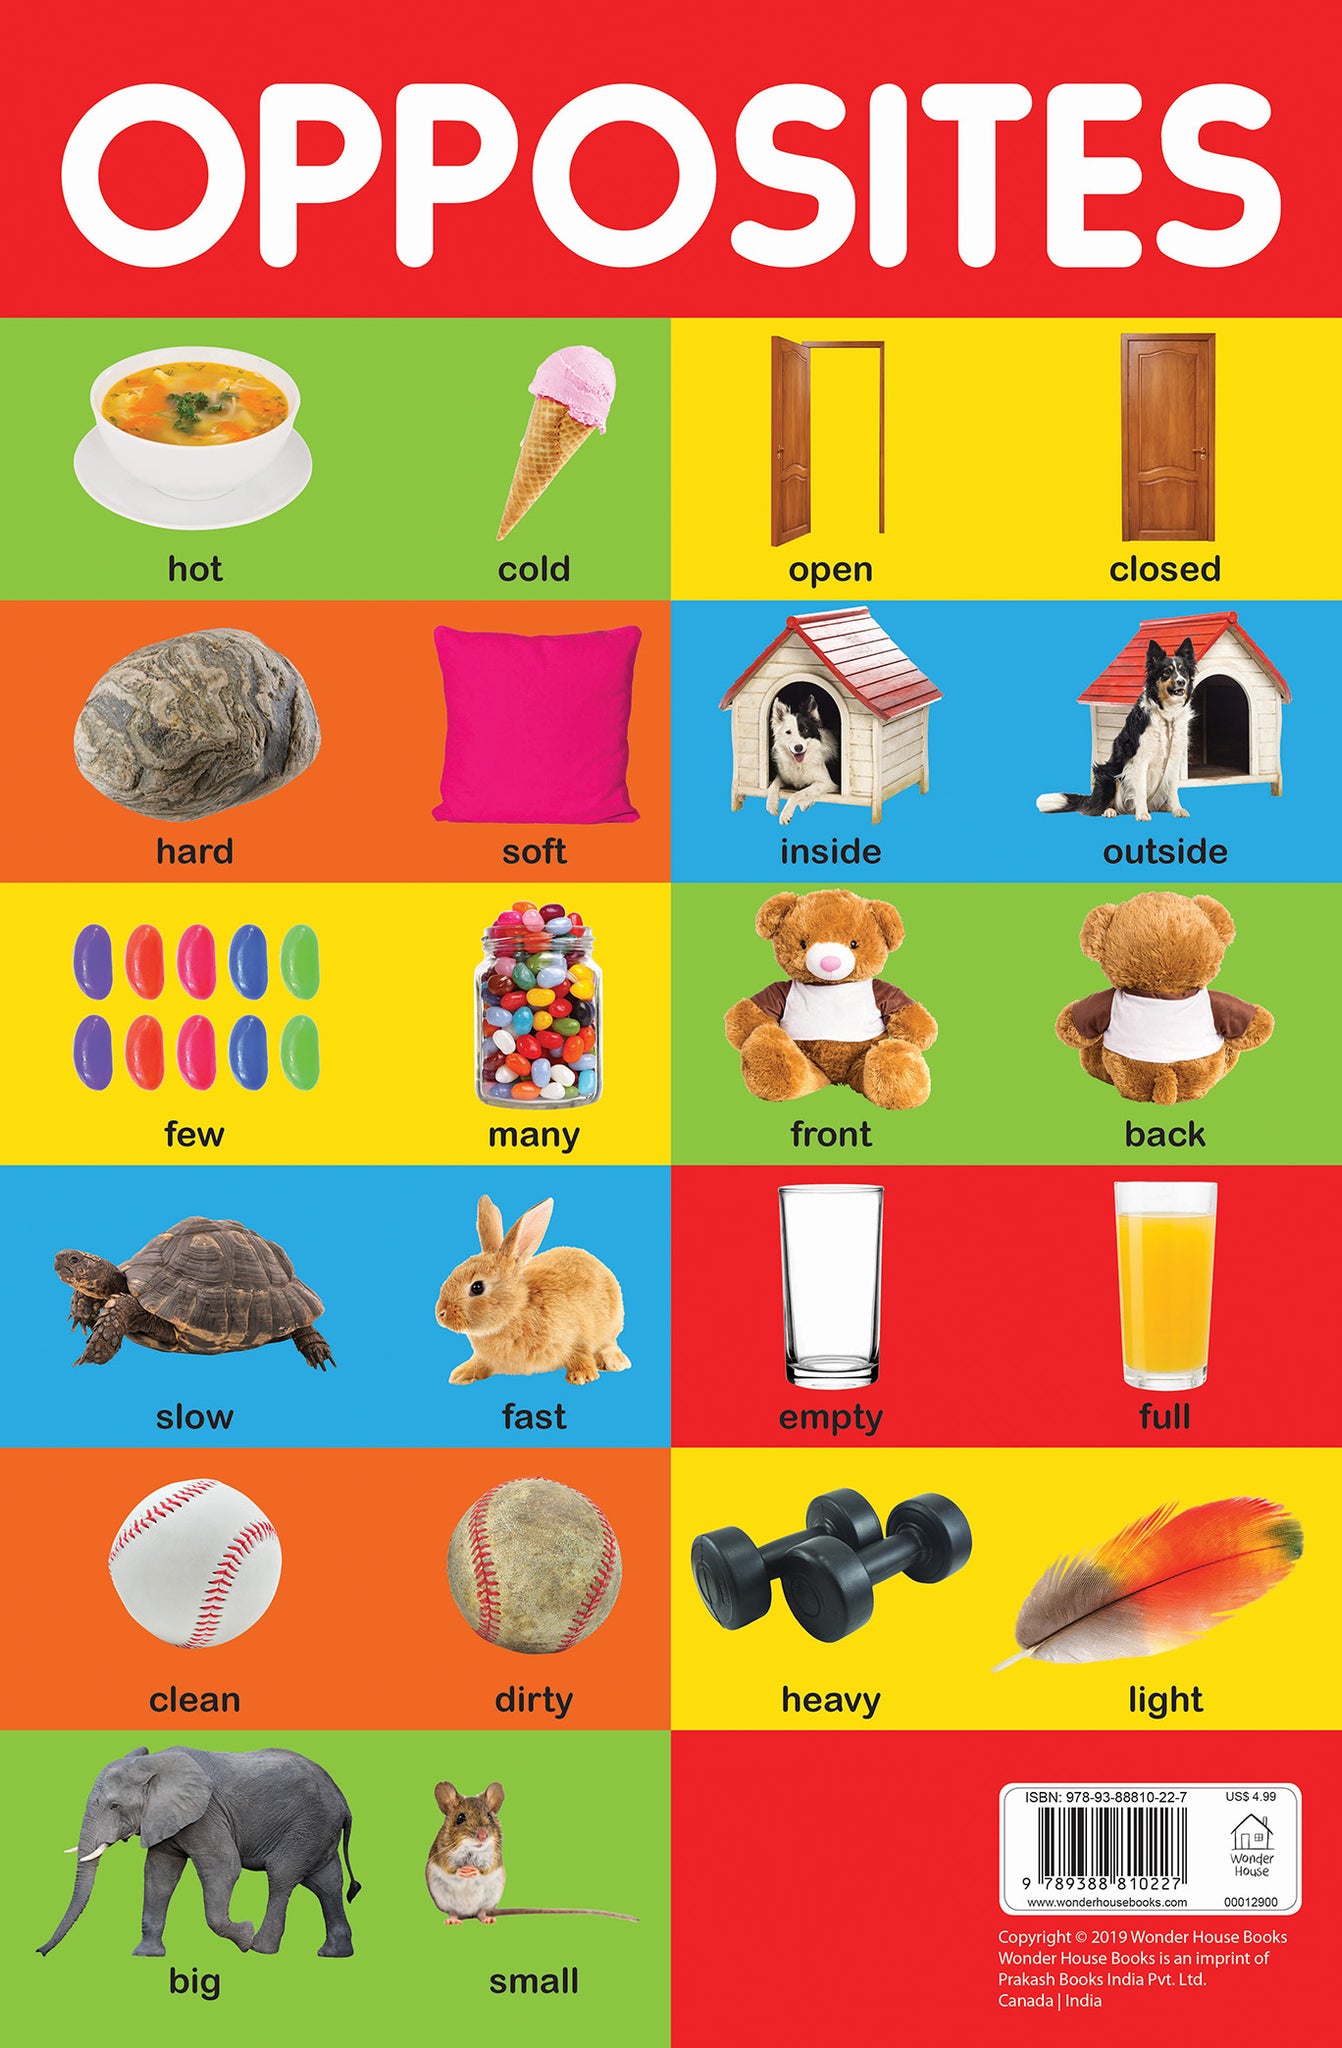 Opposites - Early Learning Educational Posters For Children: Perfect For Kindergarten, Nursery and Homeschooling (19 Inches X 29 Inches)